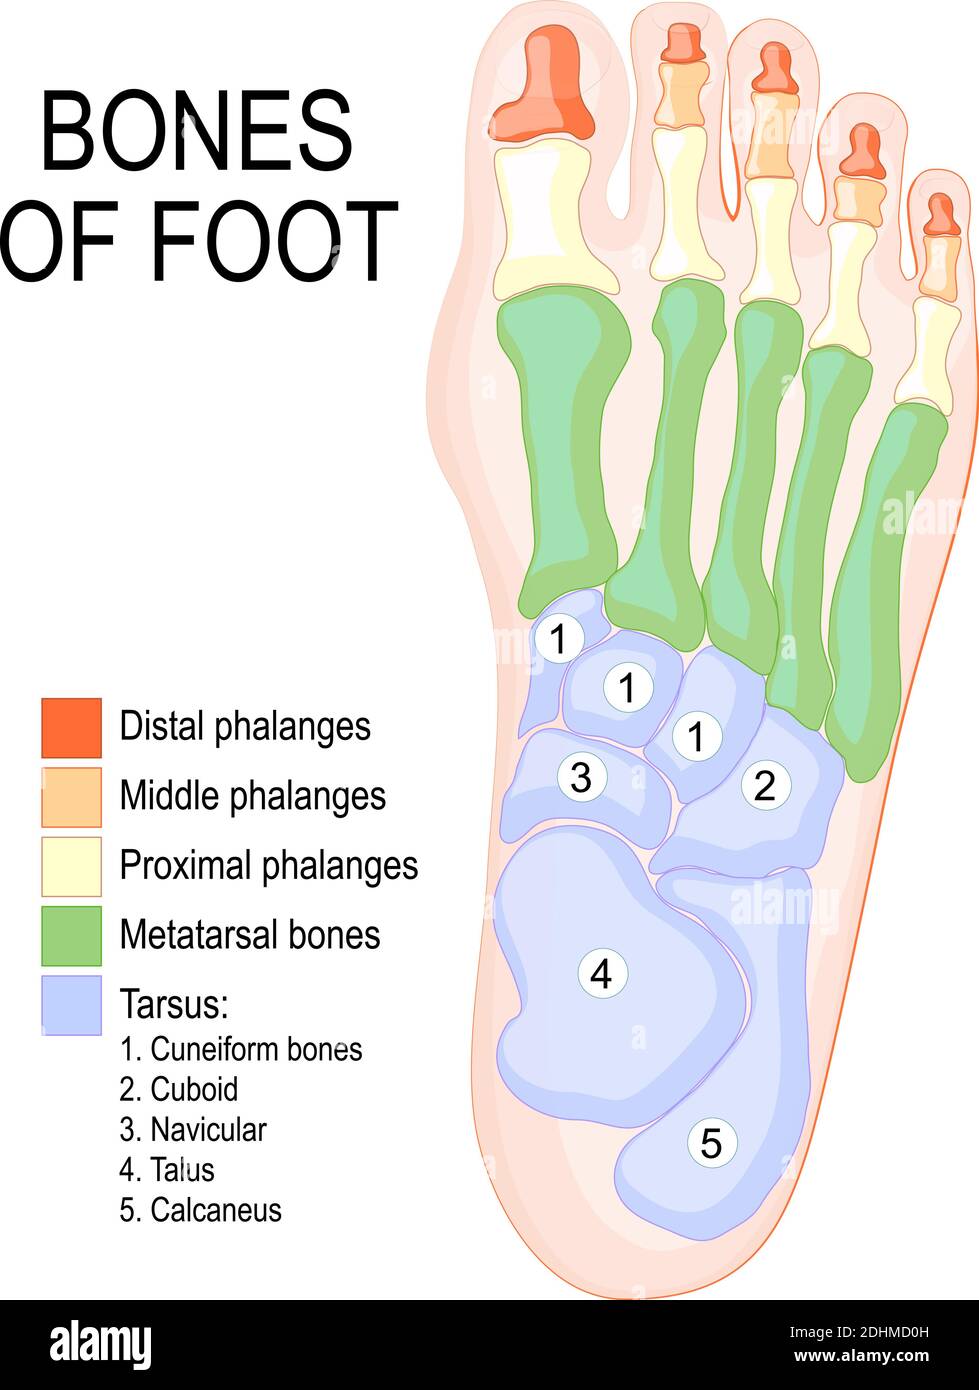 Bones of foot. Human Anatomy. The diagram shows the placement and names of all bones of foot. Stock Vector